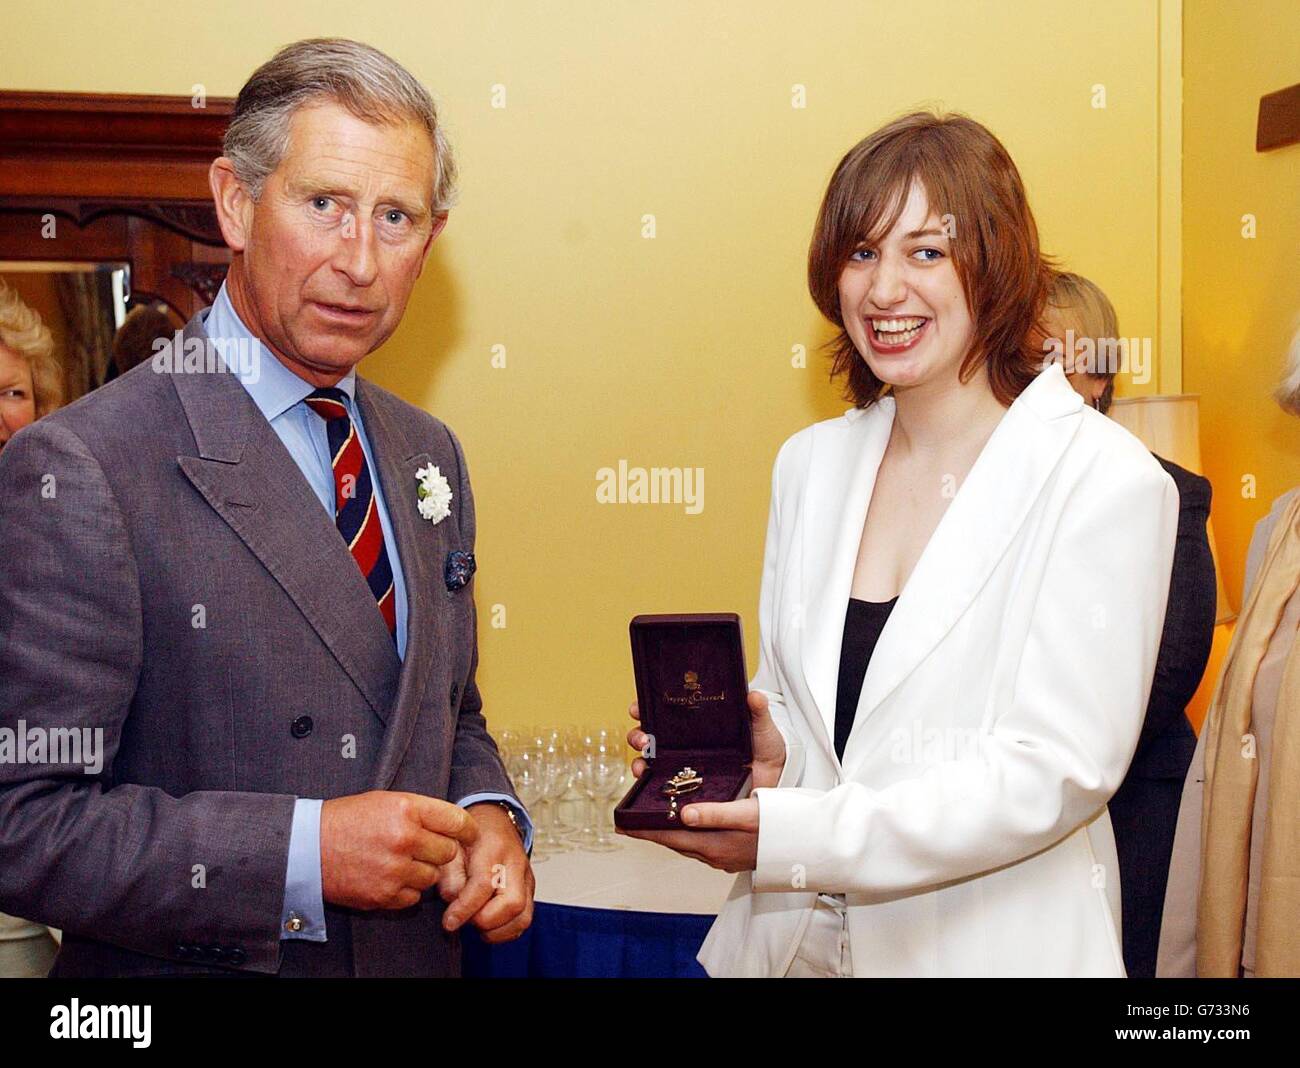 The Prince of Wales stands with his new official harpist Jemima Phillips with her 'Broach of Office' at the Great House Hotel in Laleston. Jemima Phillips, 22, follows award-winning harpist Catrin Finch, 24, who took up the post four years ago when Prince Charles reinstated the ancient royal tradition of having an Official Harpist. Miss Phillips, whose family are from Ebbw Vale in South Wales, is currently living in London, completing a course at the Royal College of Music. Stock Photo